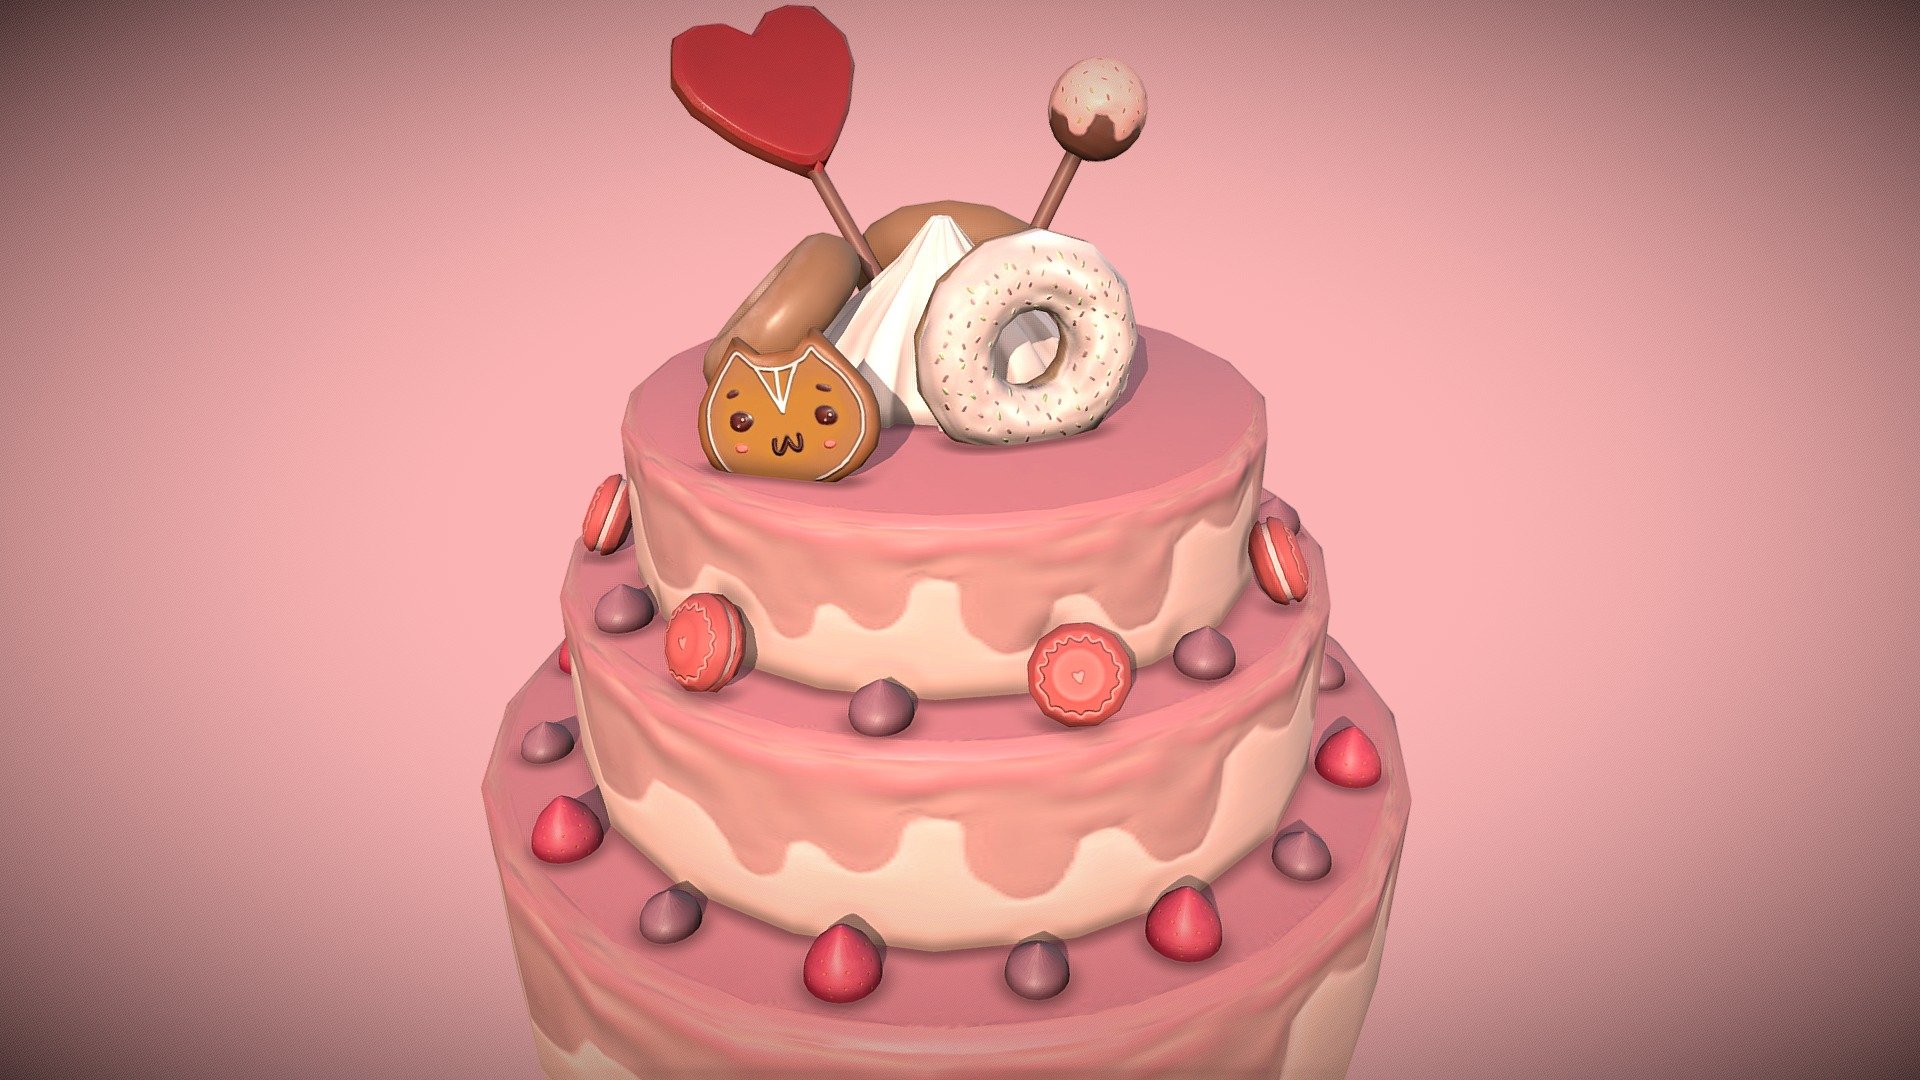 A cake I modelled in Maya and textured in Substance Painter!
The cat biscuit is my favourite part.

LowPolyDessertChallenge - Low Poly Cake - 3D model by sarah1999 3d model